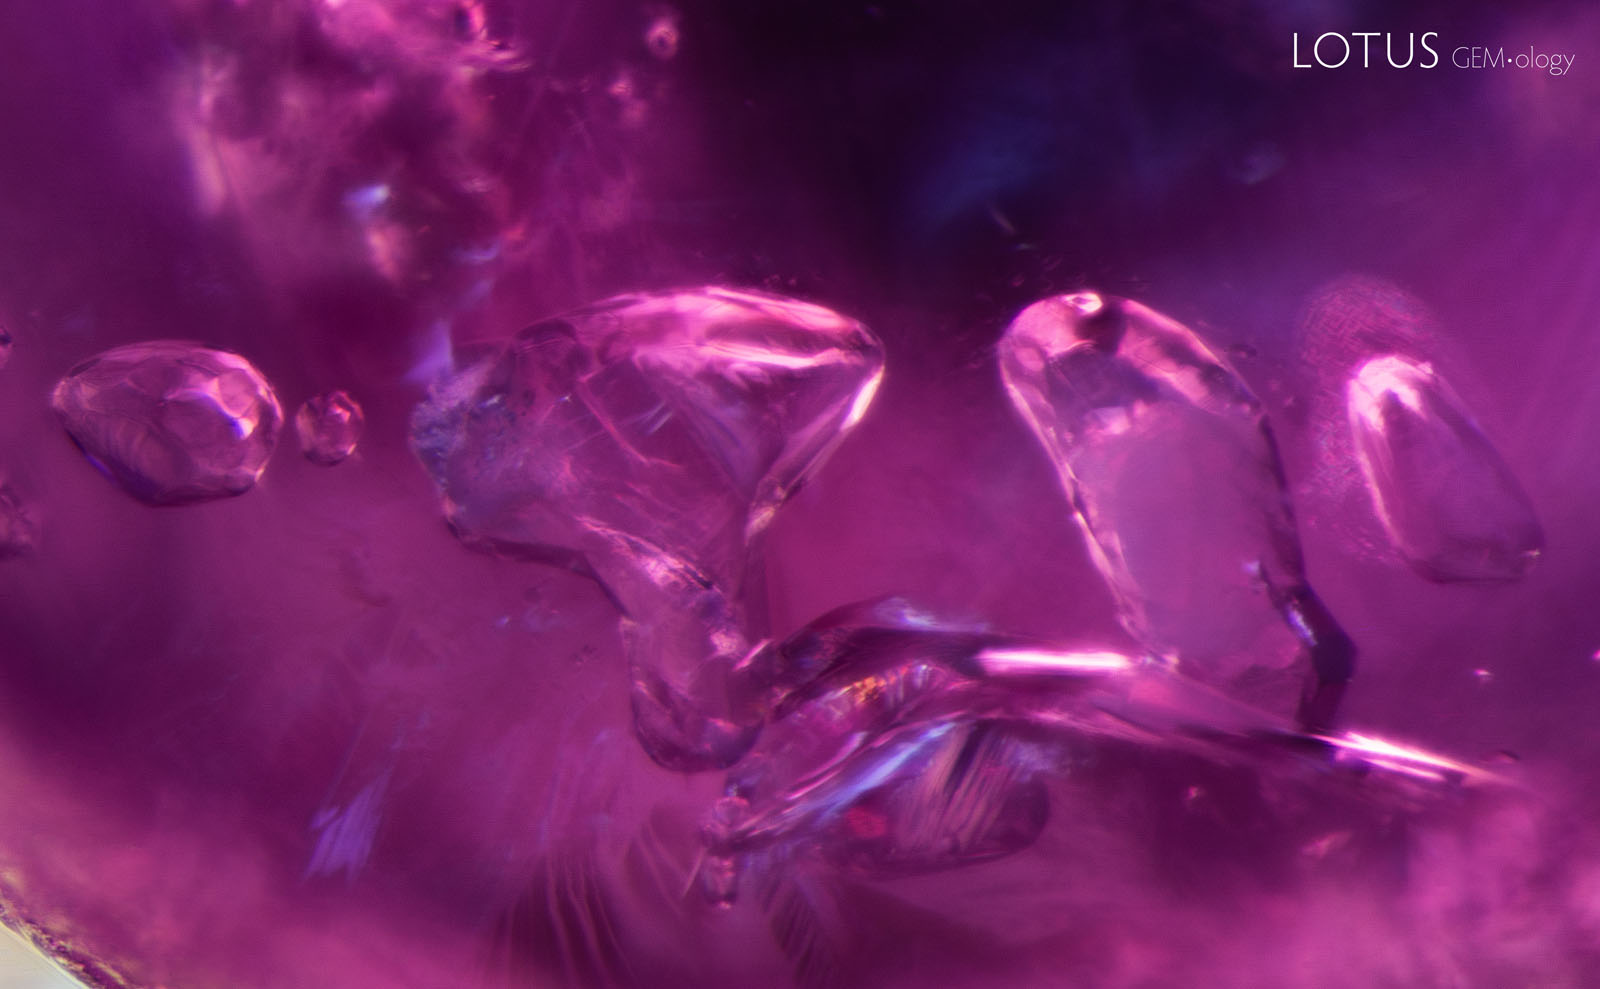 (750°C) The crystal second from the right has changed in texture and become slightly opaque; the one on the far right has also developed a fissure that has begun to heal.